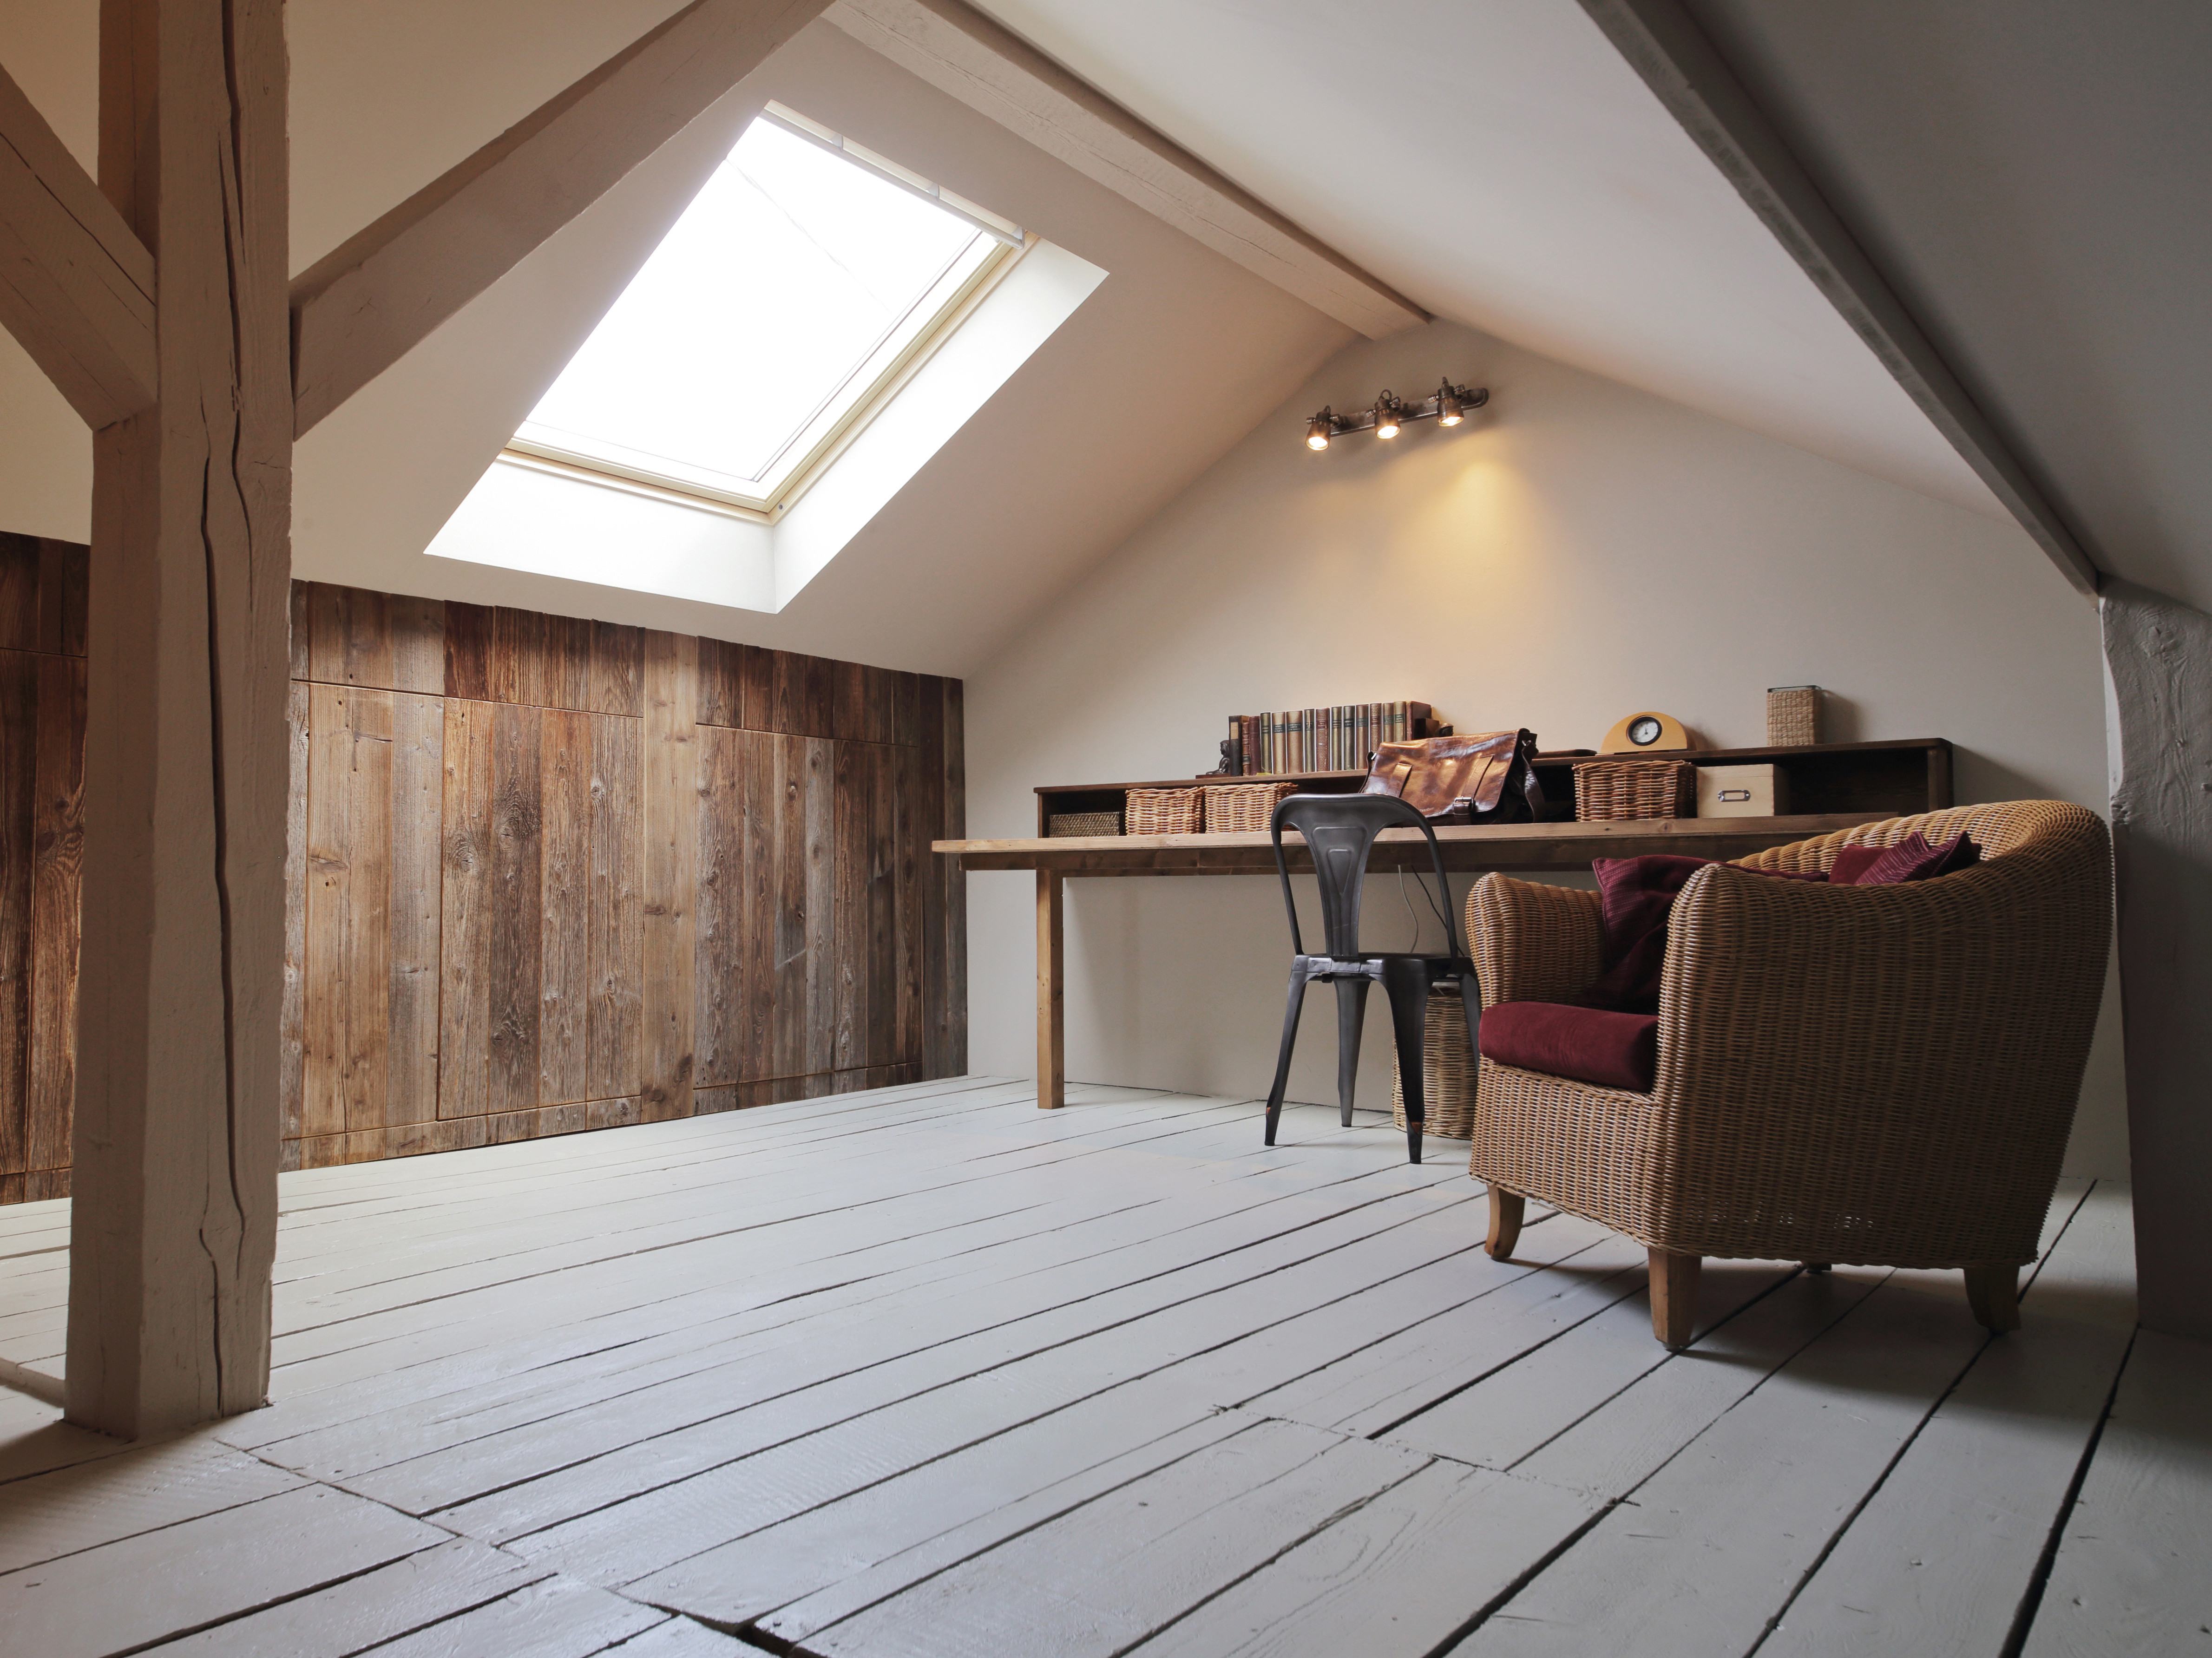 Living space in the attic